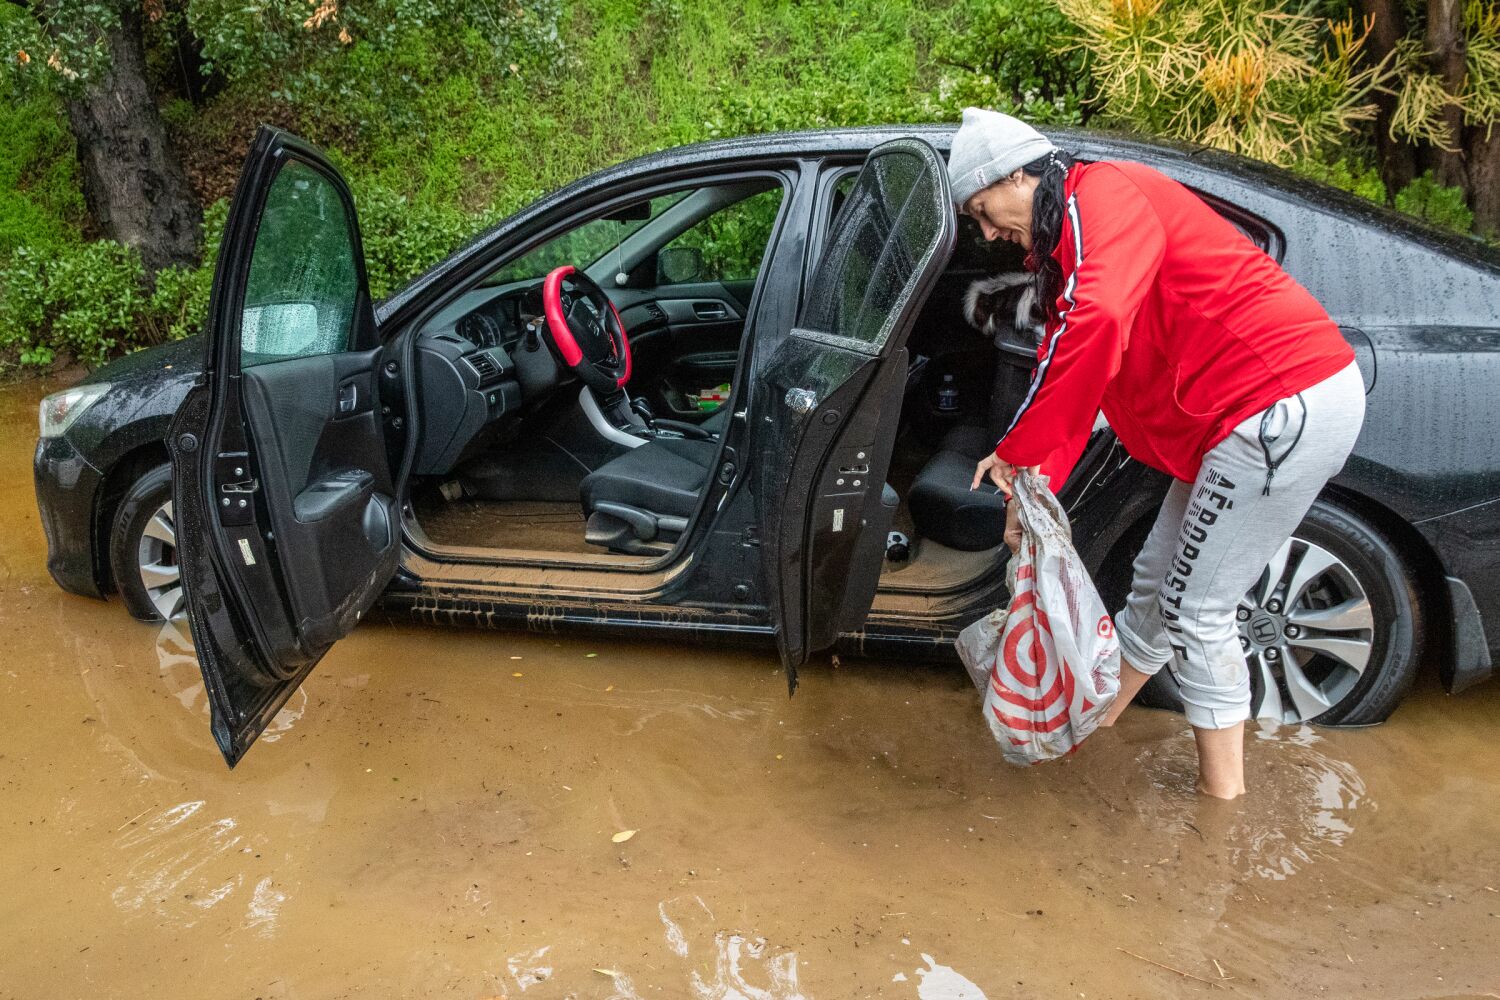 'Dry' California got big rains. Was it really an epic weather forecasting fail?